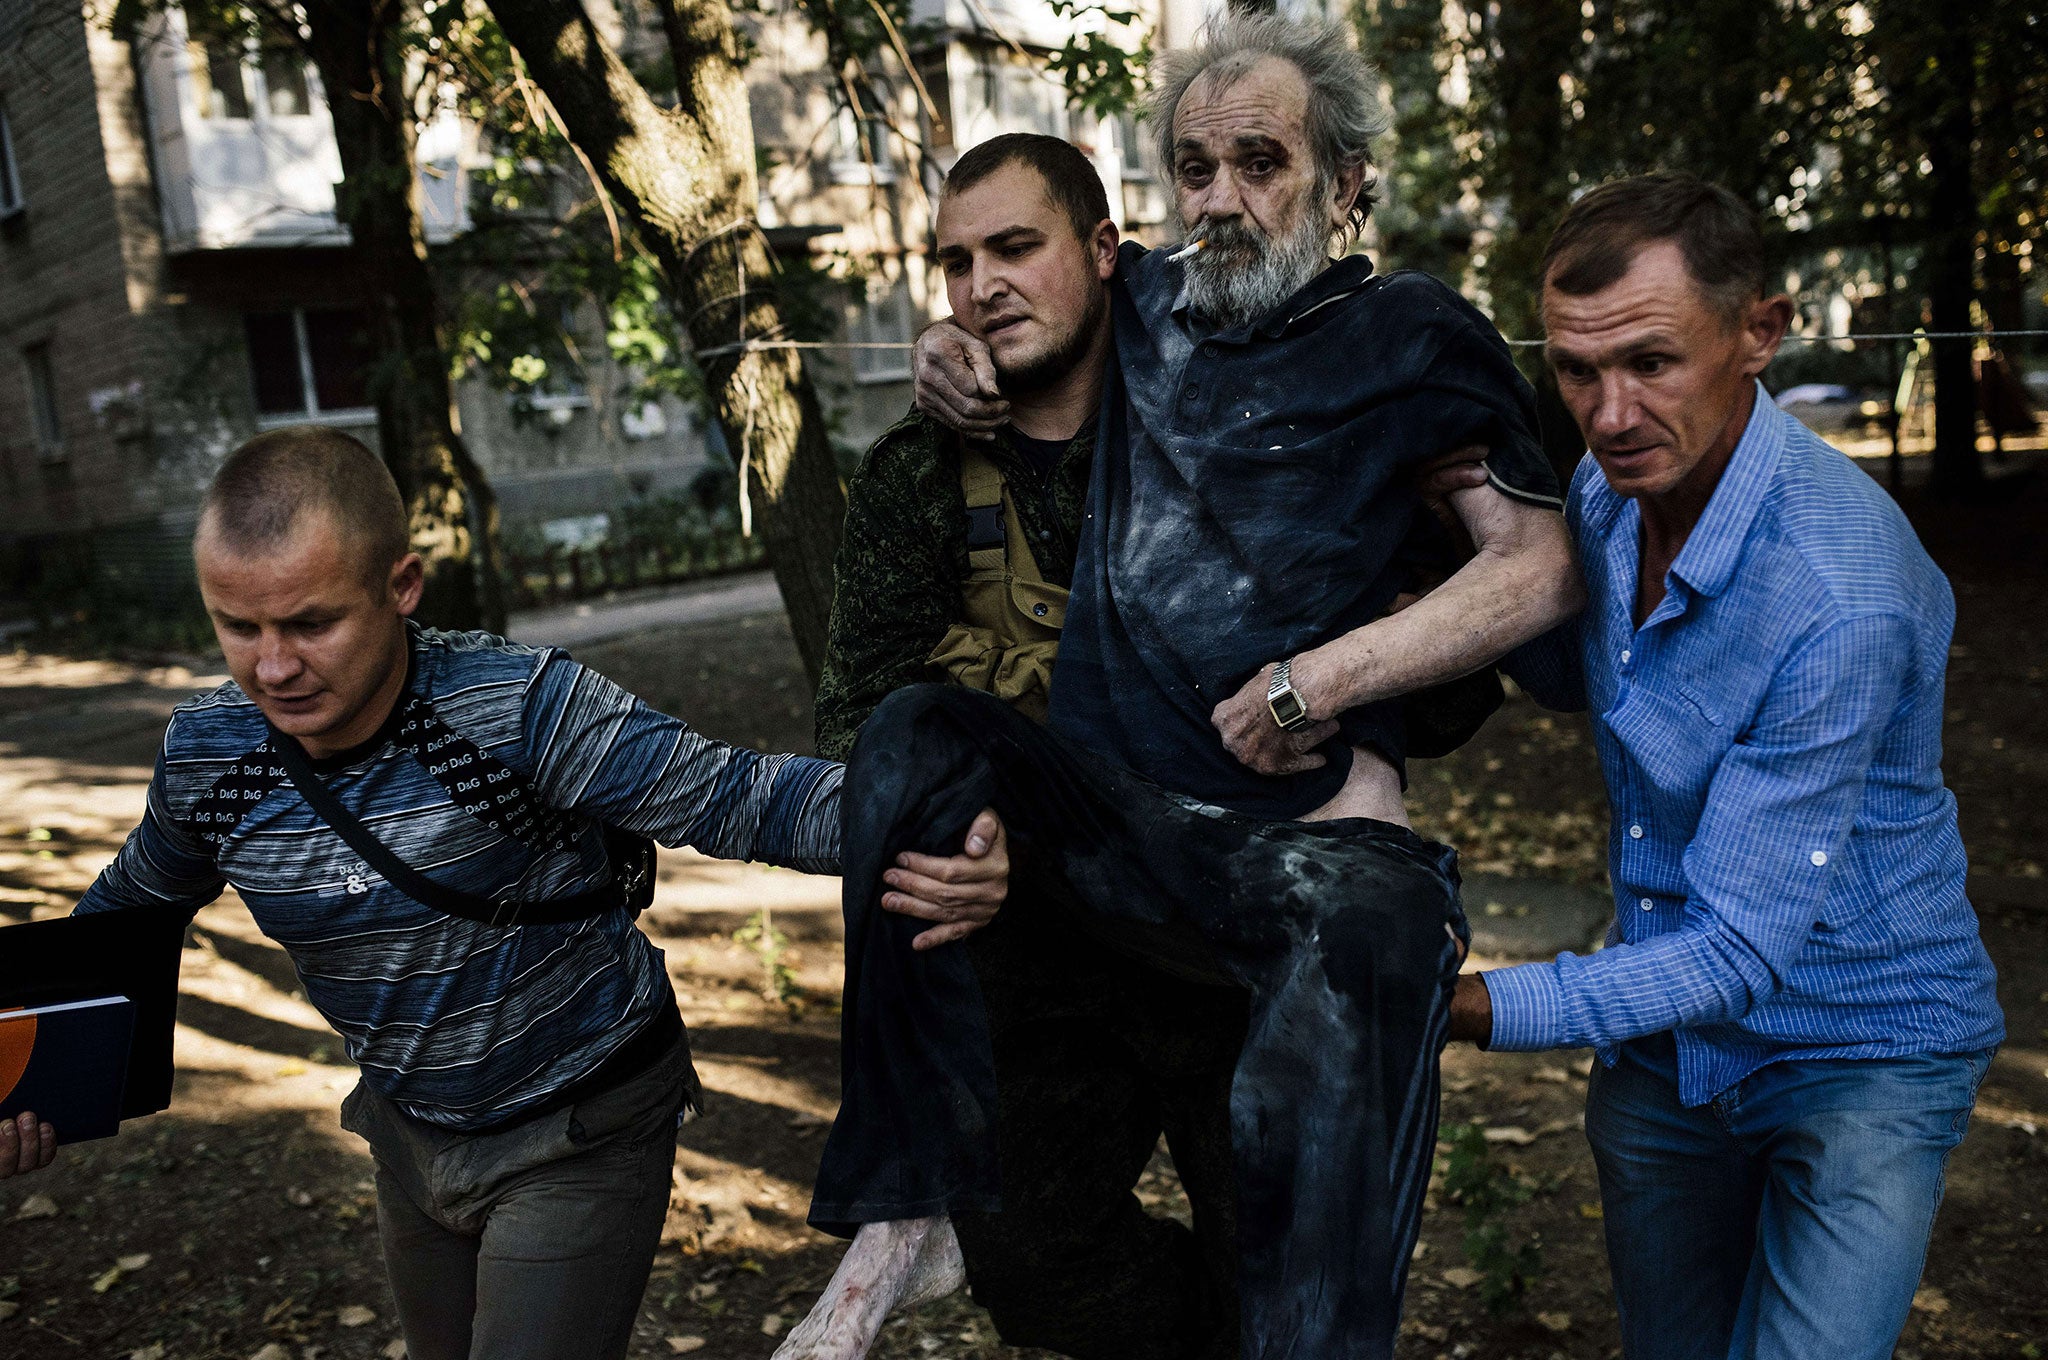 Men carry a wounded elderly man to safety after a shelling in the main separatist stronghold Donetsk